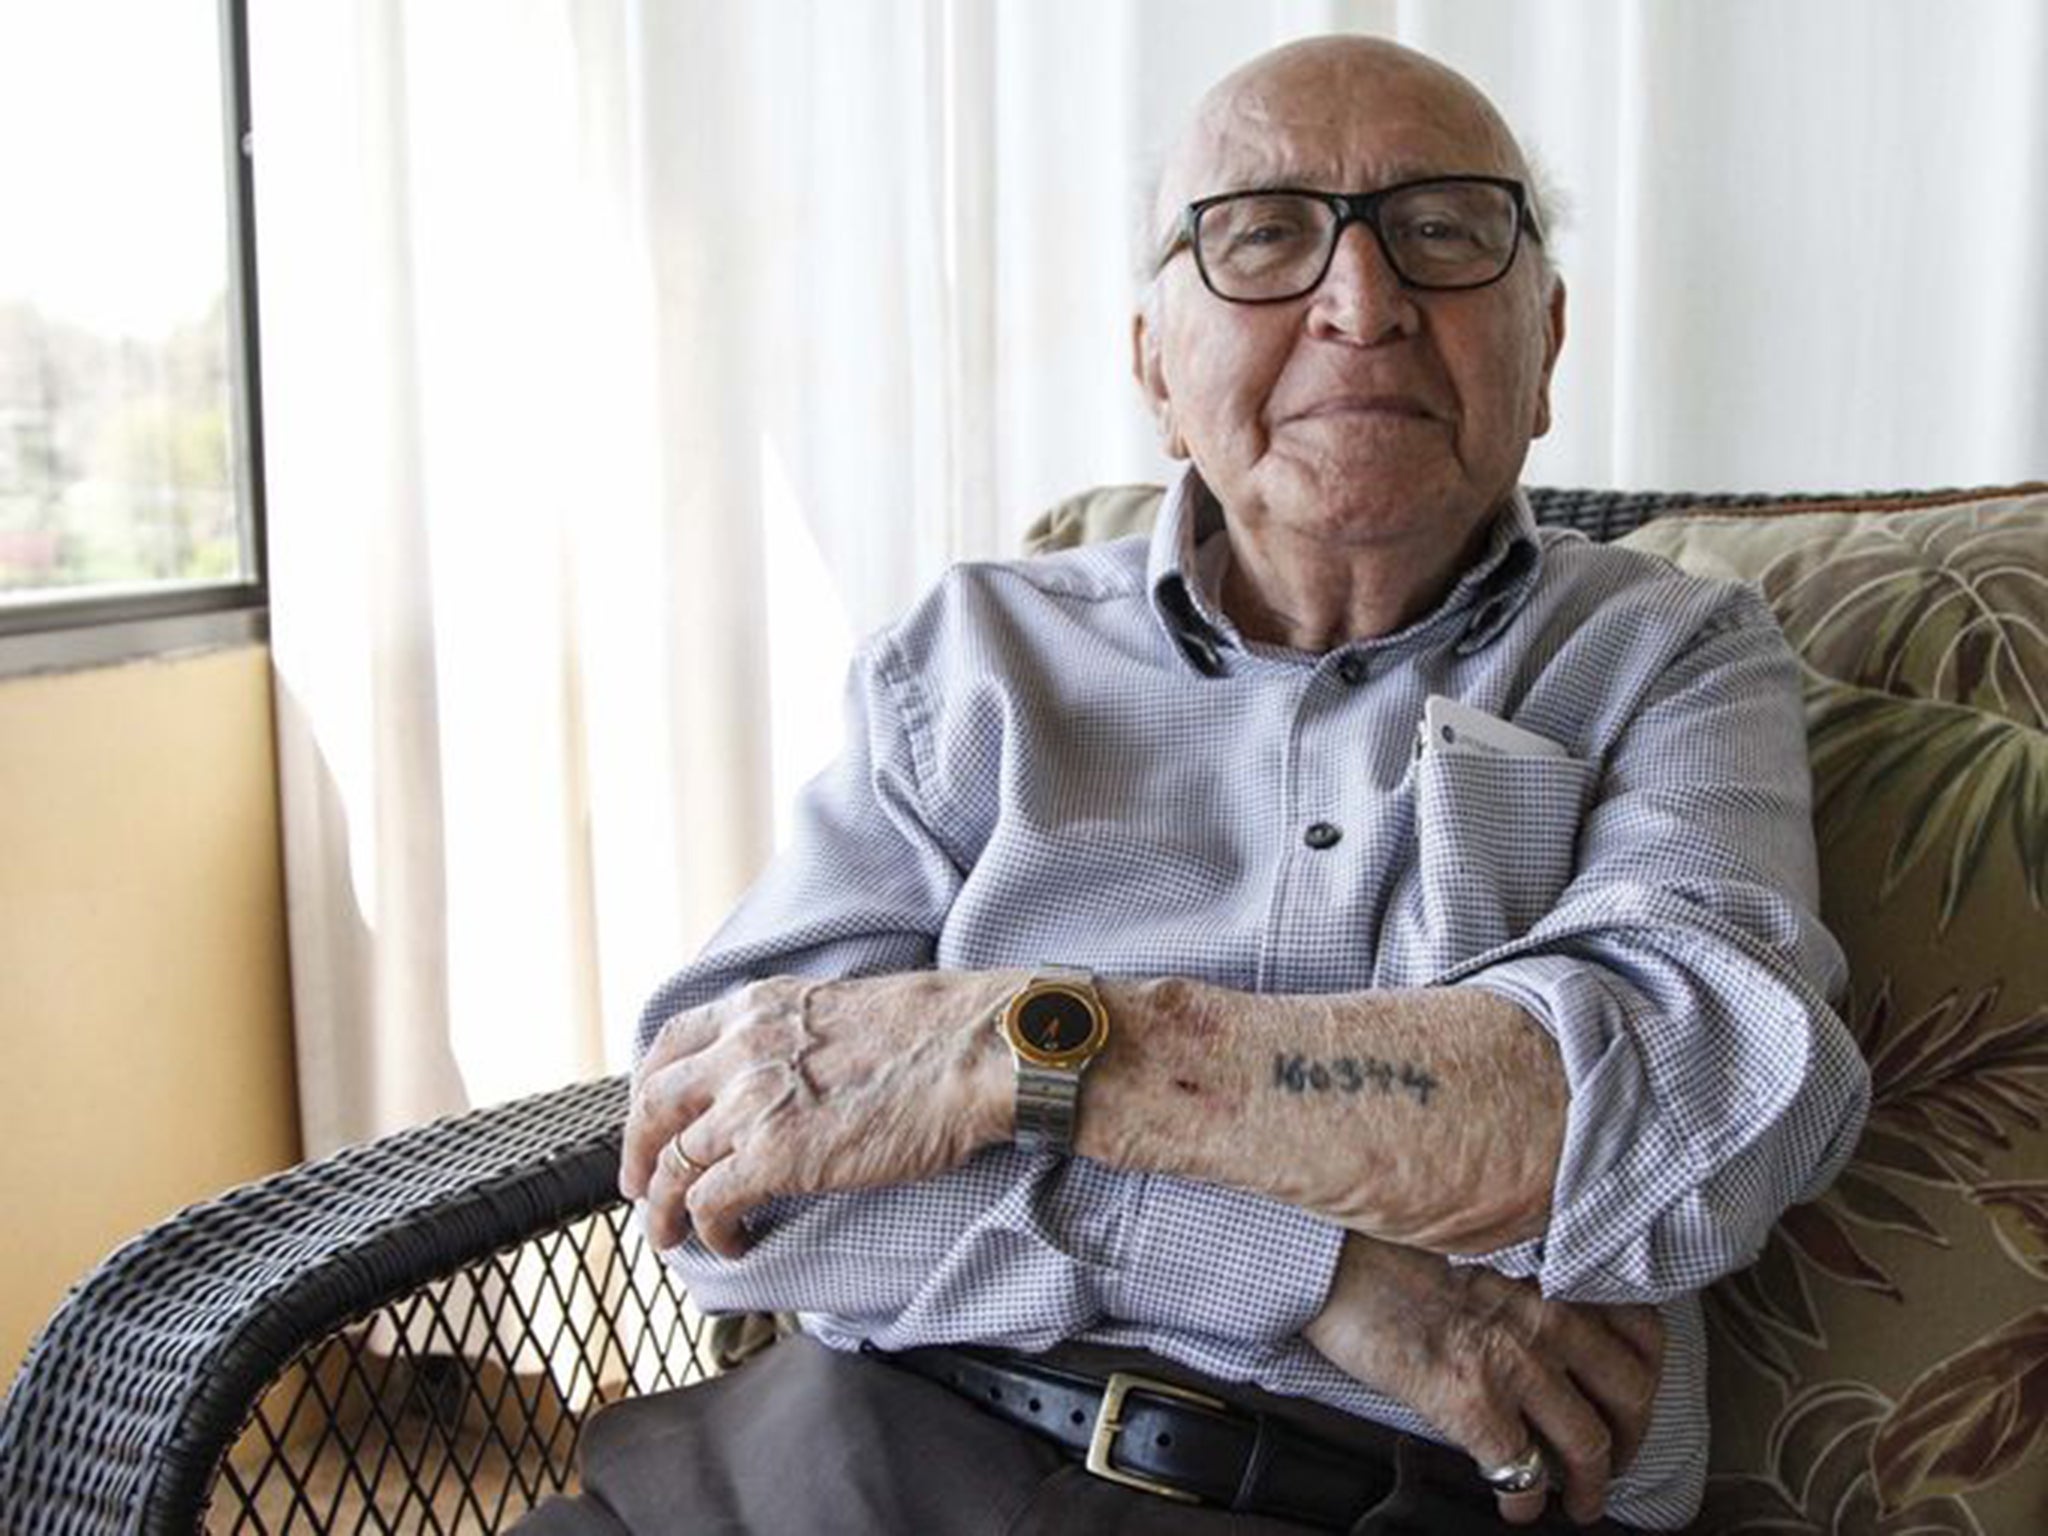 David Wolnerman, 88, of Des Moines, and his wife, Jennie, are the last known survivors of the Nazi concentration camps left in central Iowa. Wolnerman is featured in “A Lucky Lie,” a book by a 12-year-old West Des Moines girl describing his experiences.